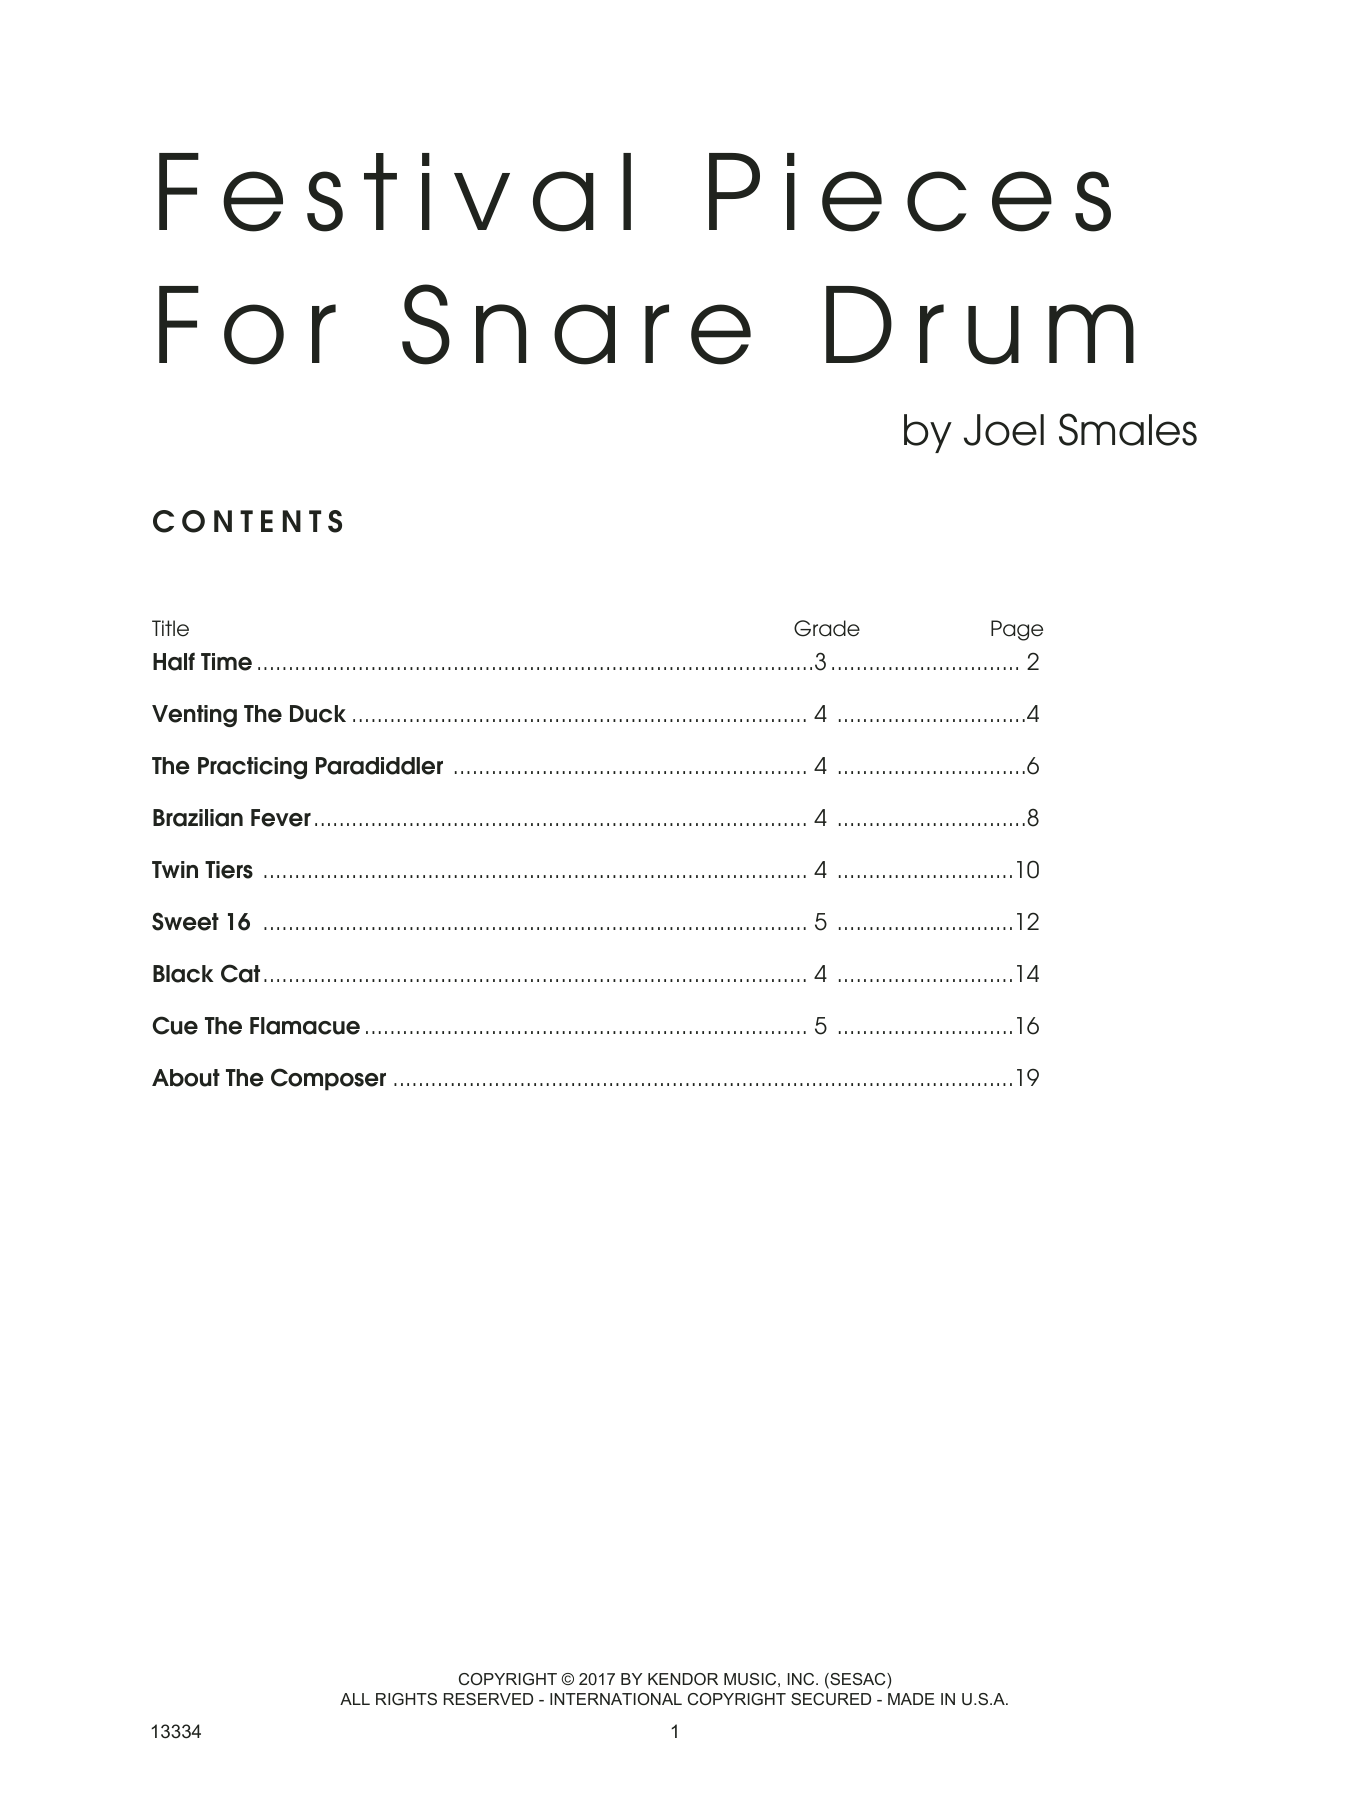 Download Joel Smales Festival Pieces For Snare Drum Sheet Music